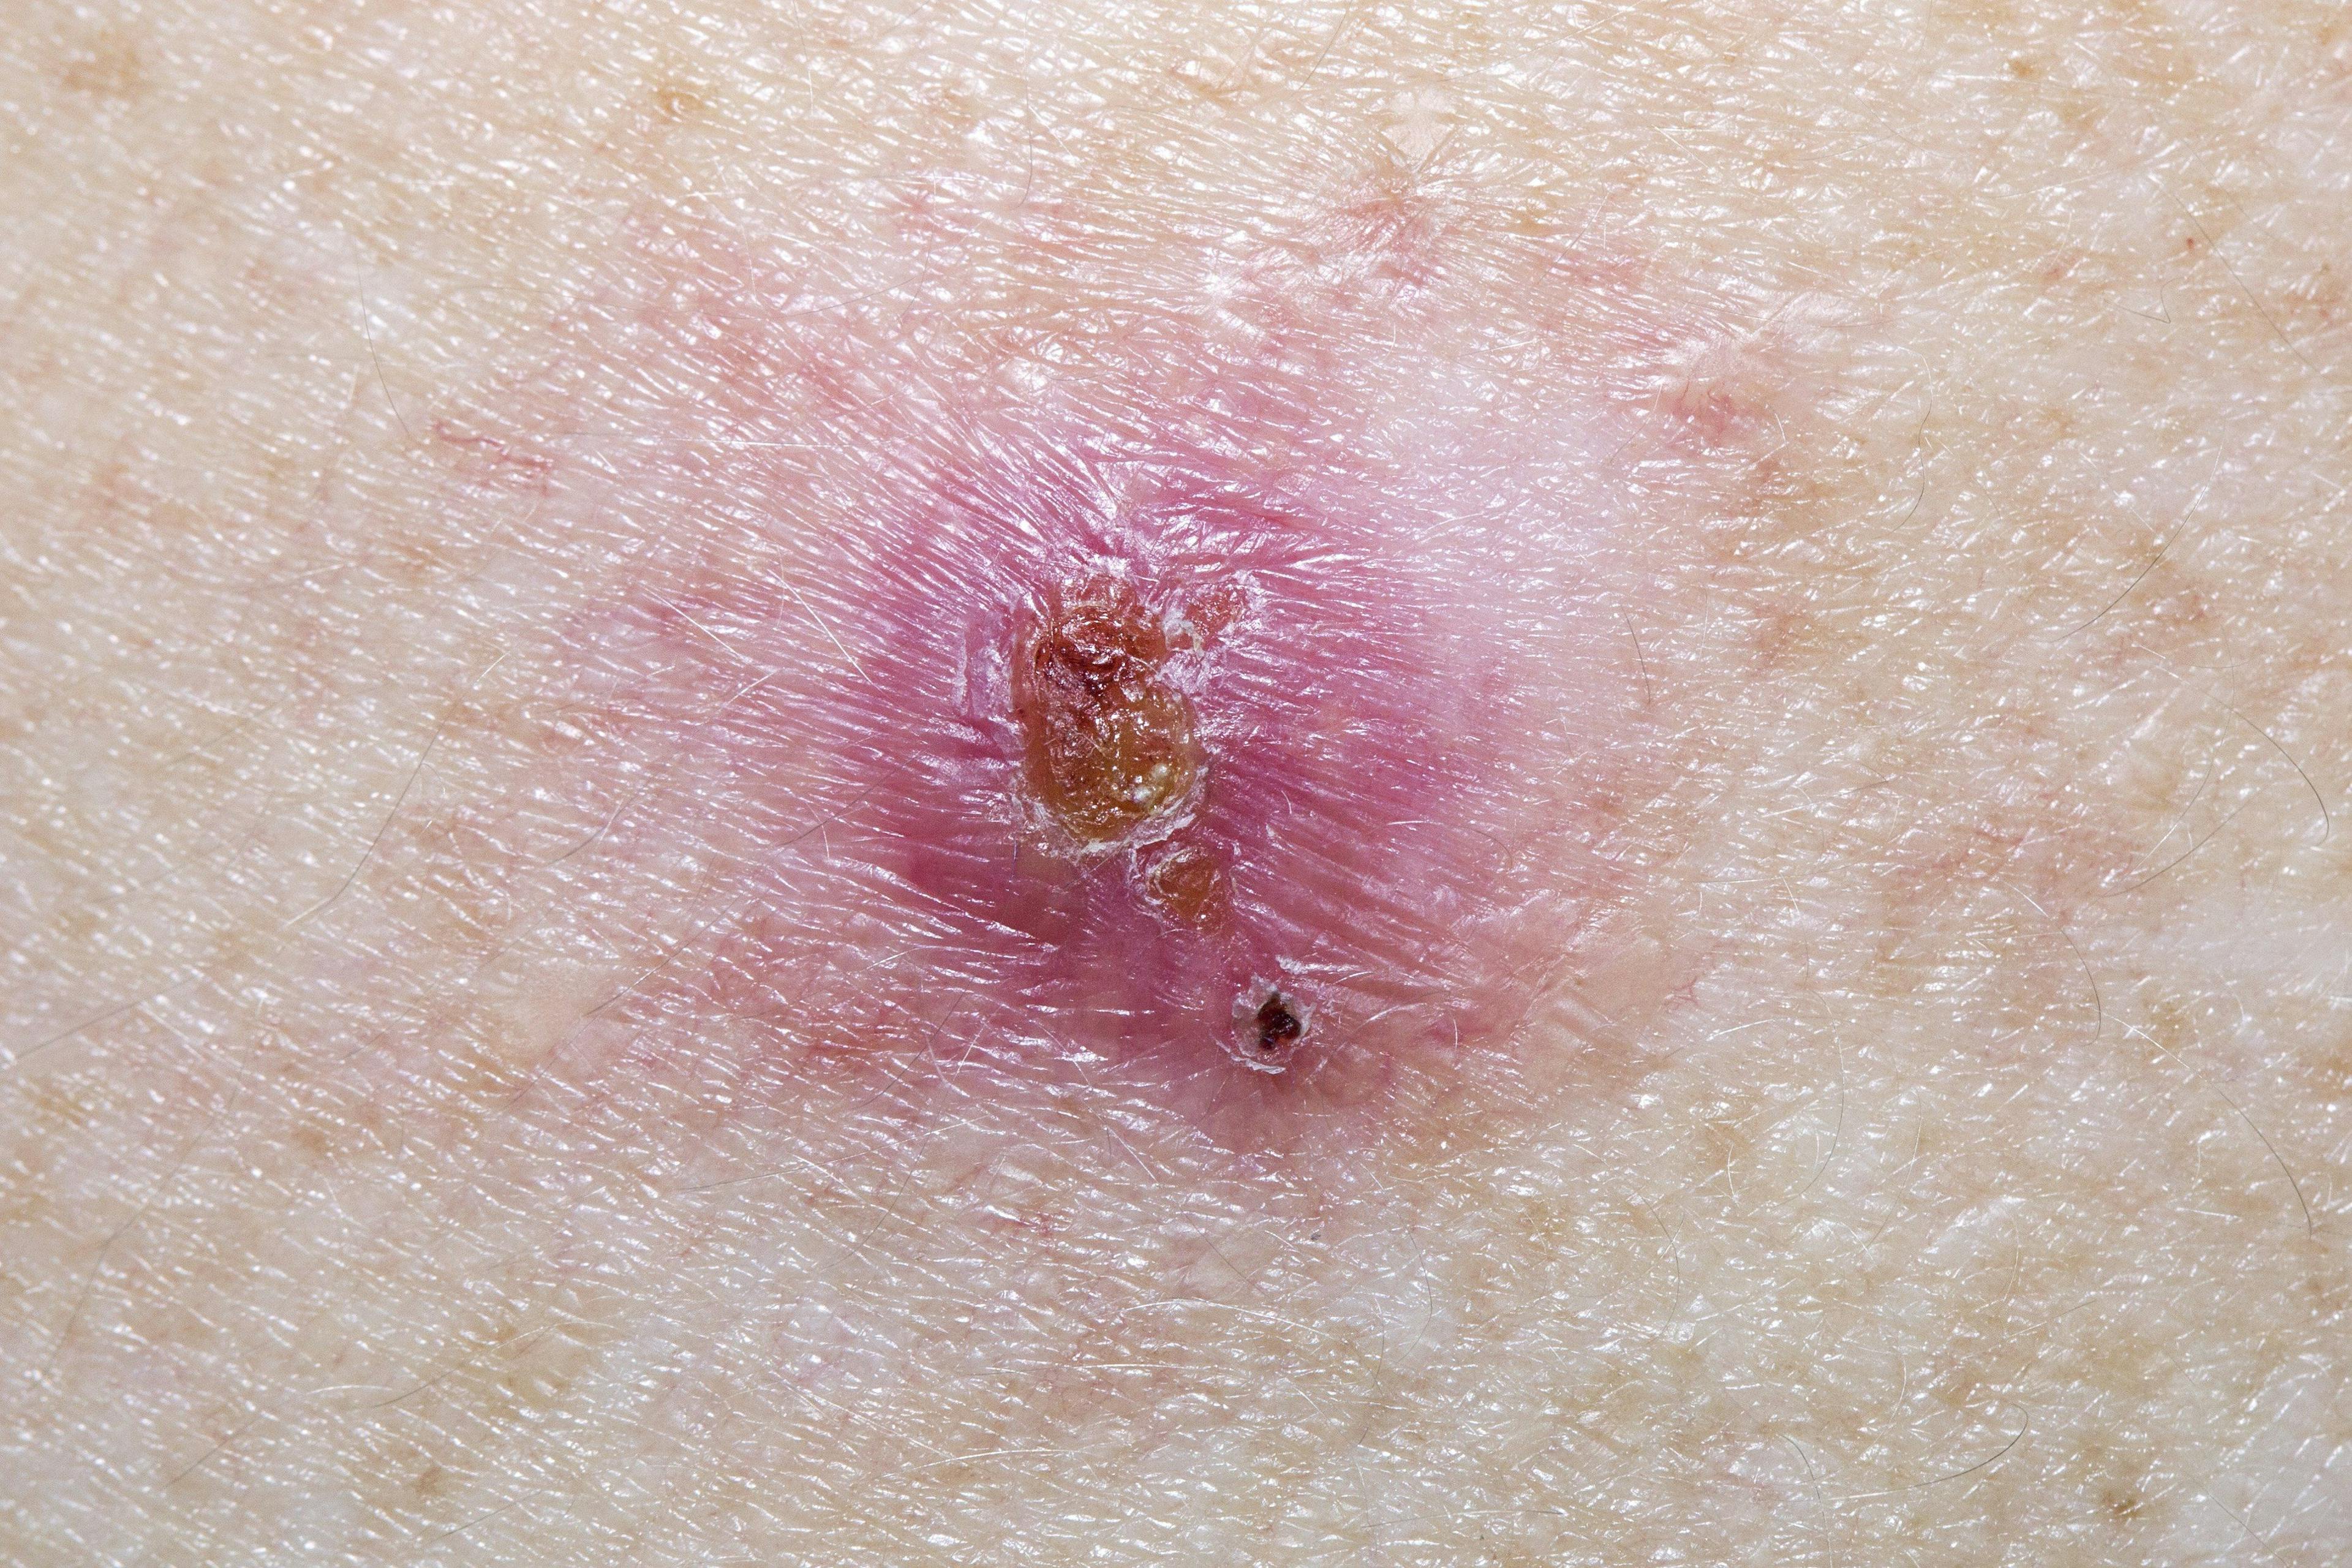 Radiation therapy resurfaces in skin cancer treatment